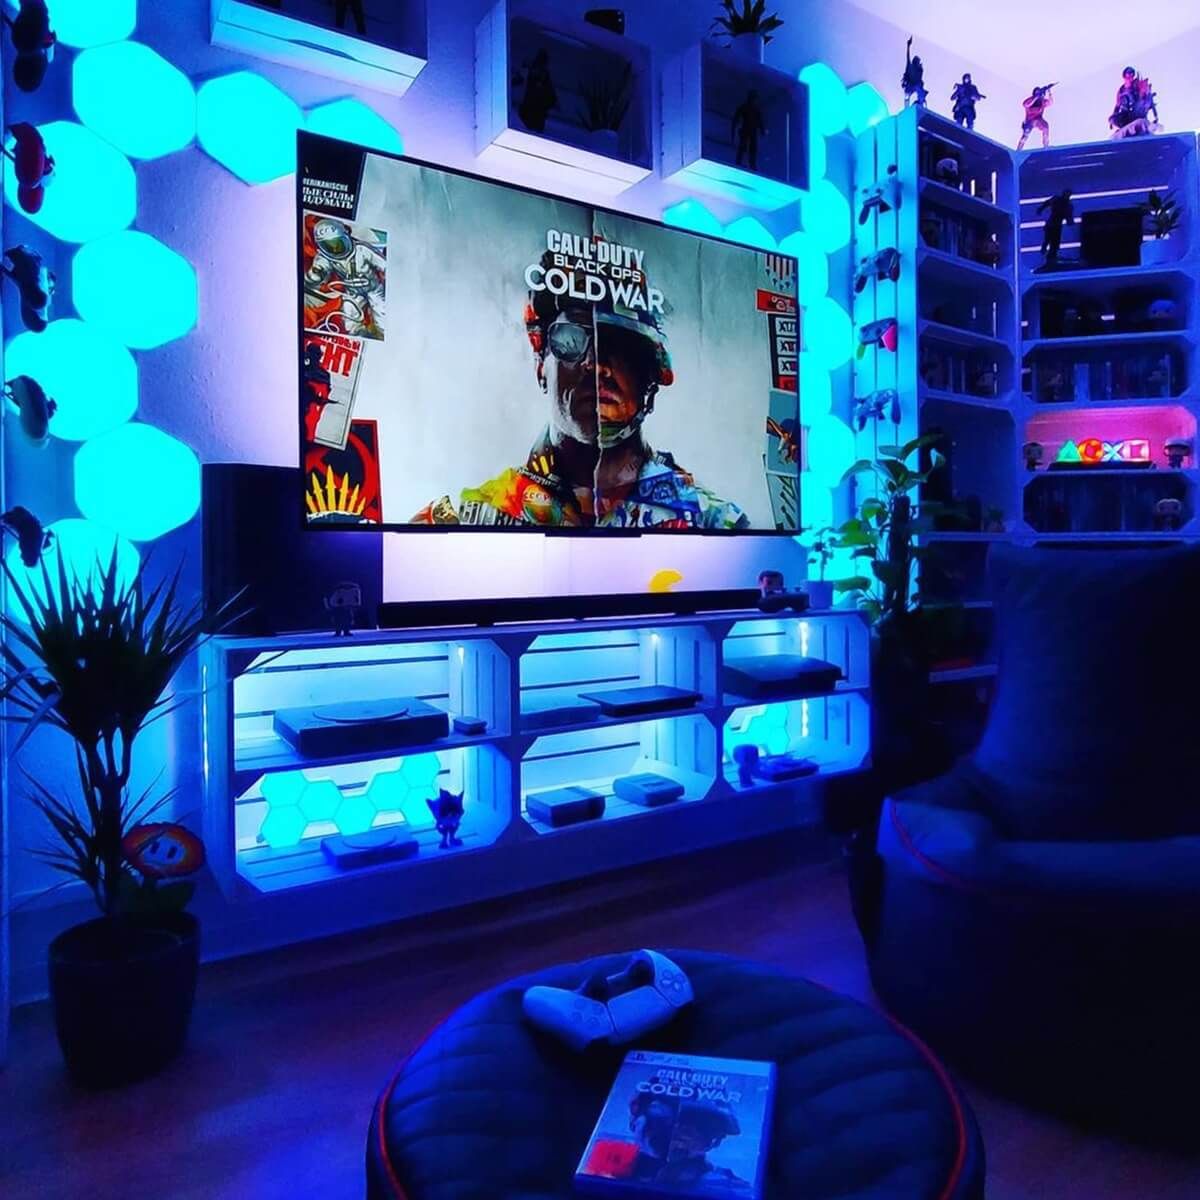 Best Gaming Entertainment Centers & Tv Stand Setup Ideas | Gridfiti Within Rgb Tv Entertainment Centers (Gallery 5 of 20)